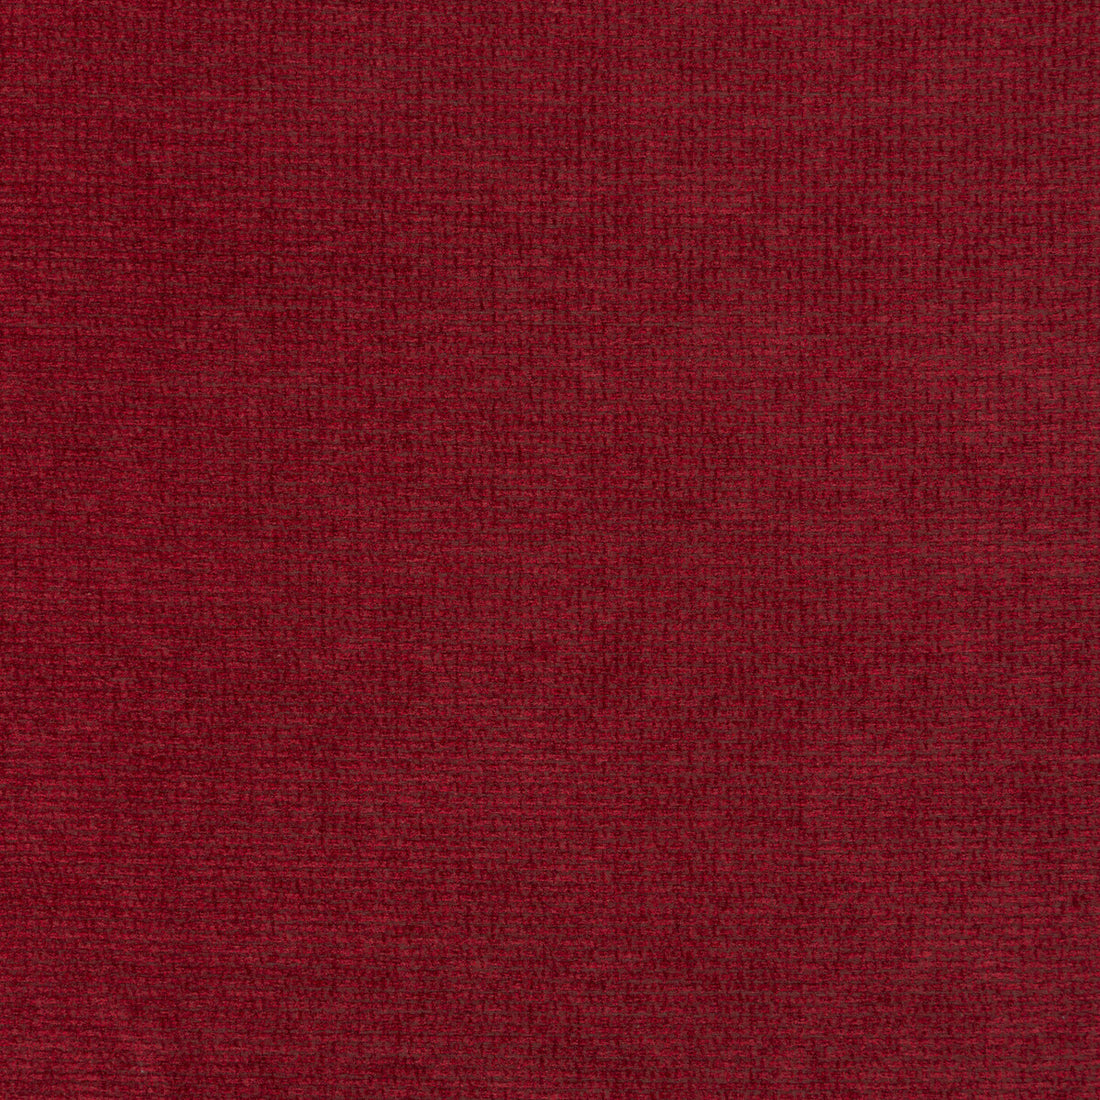 Matrix fabric in crimson color - pattern BF10686.458.0 - by G P &amp; J Baker in the Essential Colours collection